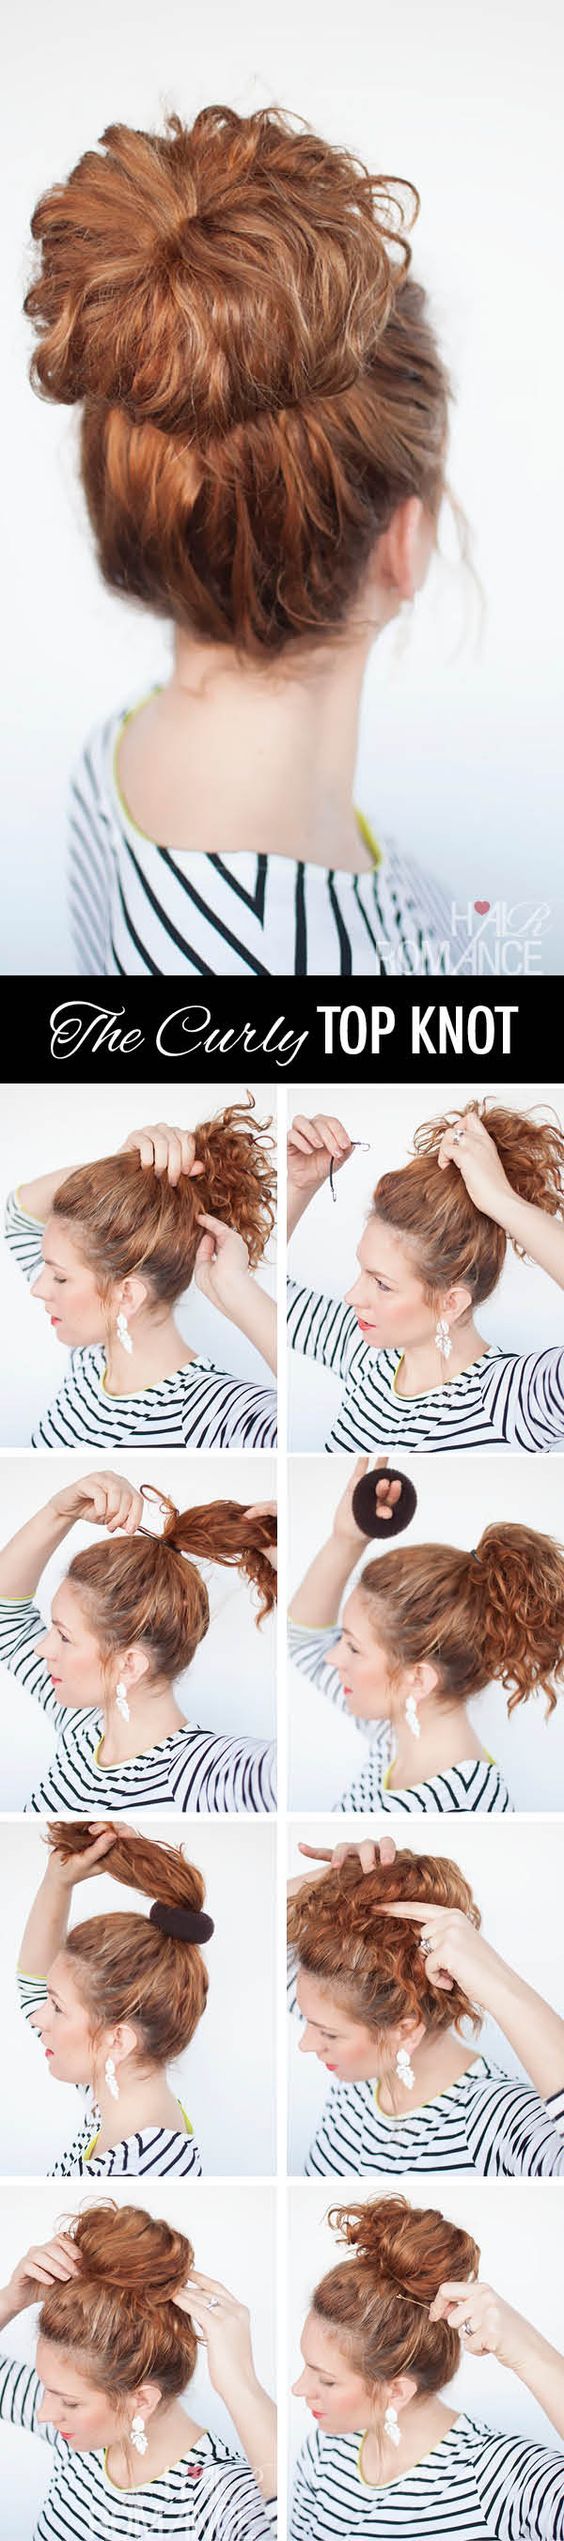 the curly top knot hairstyle tutorial